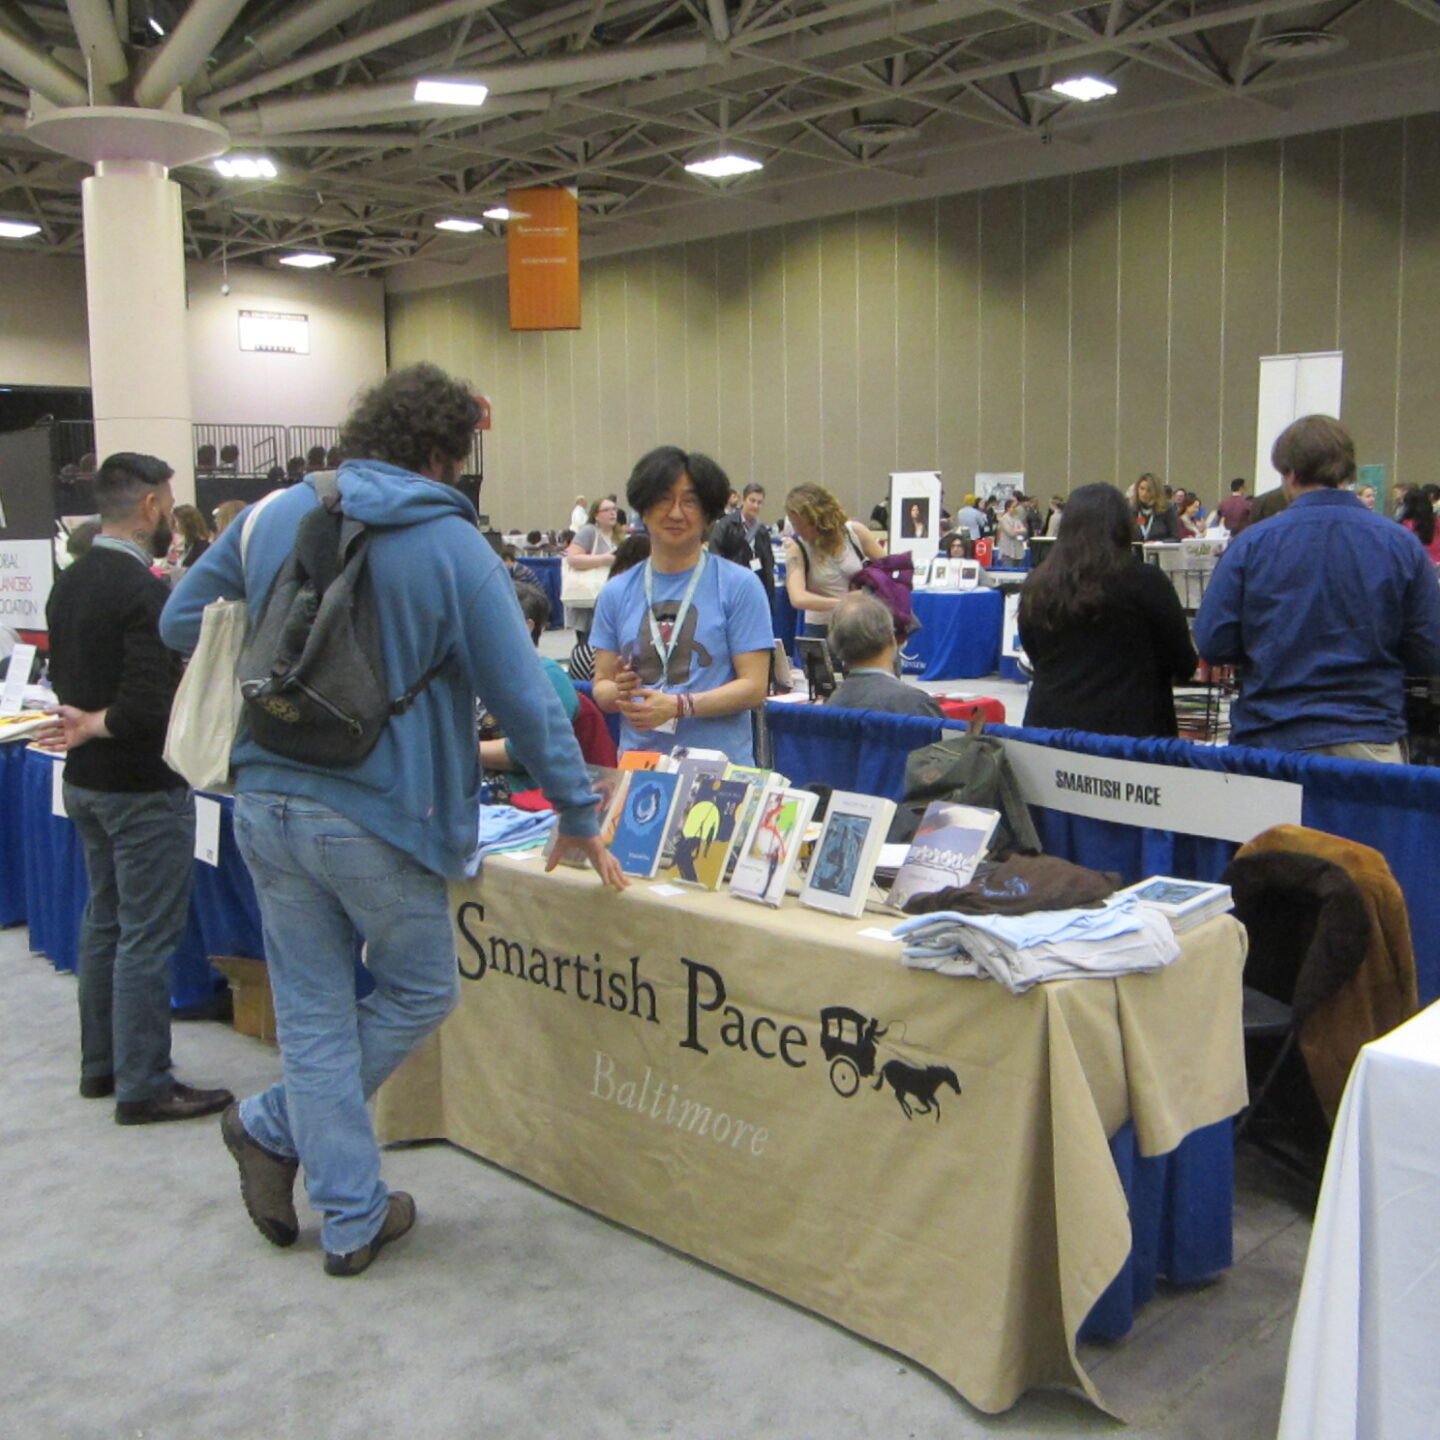 A group of event-goers on a book sale event